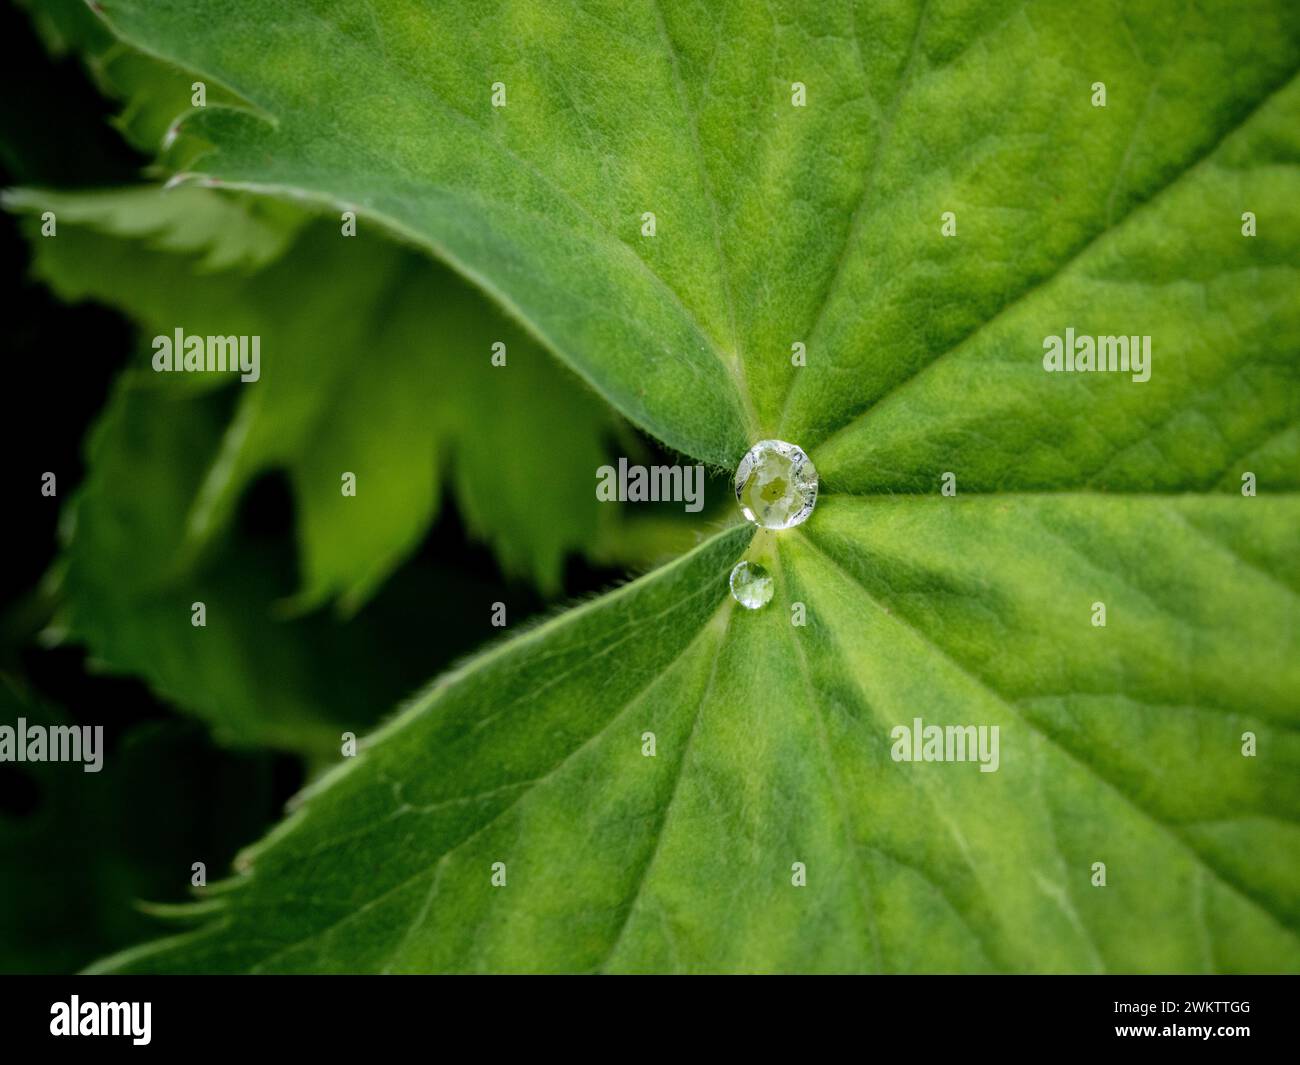 Close-up of diamond-like water droplets on the fan shaped leaf of an Alchemilla Mollis growing in a garden Stock Photo